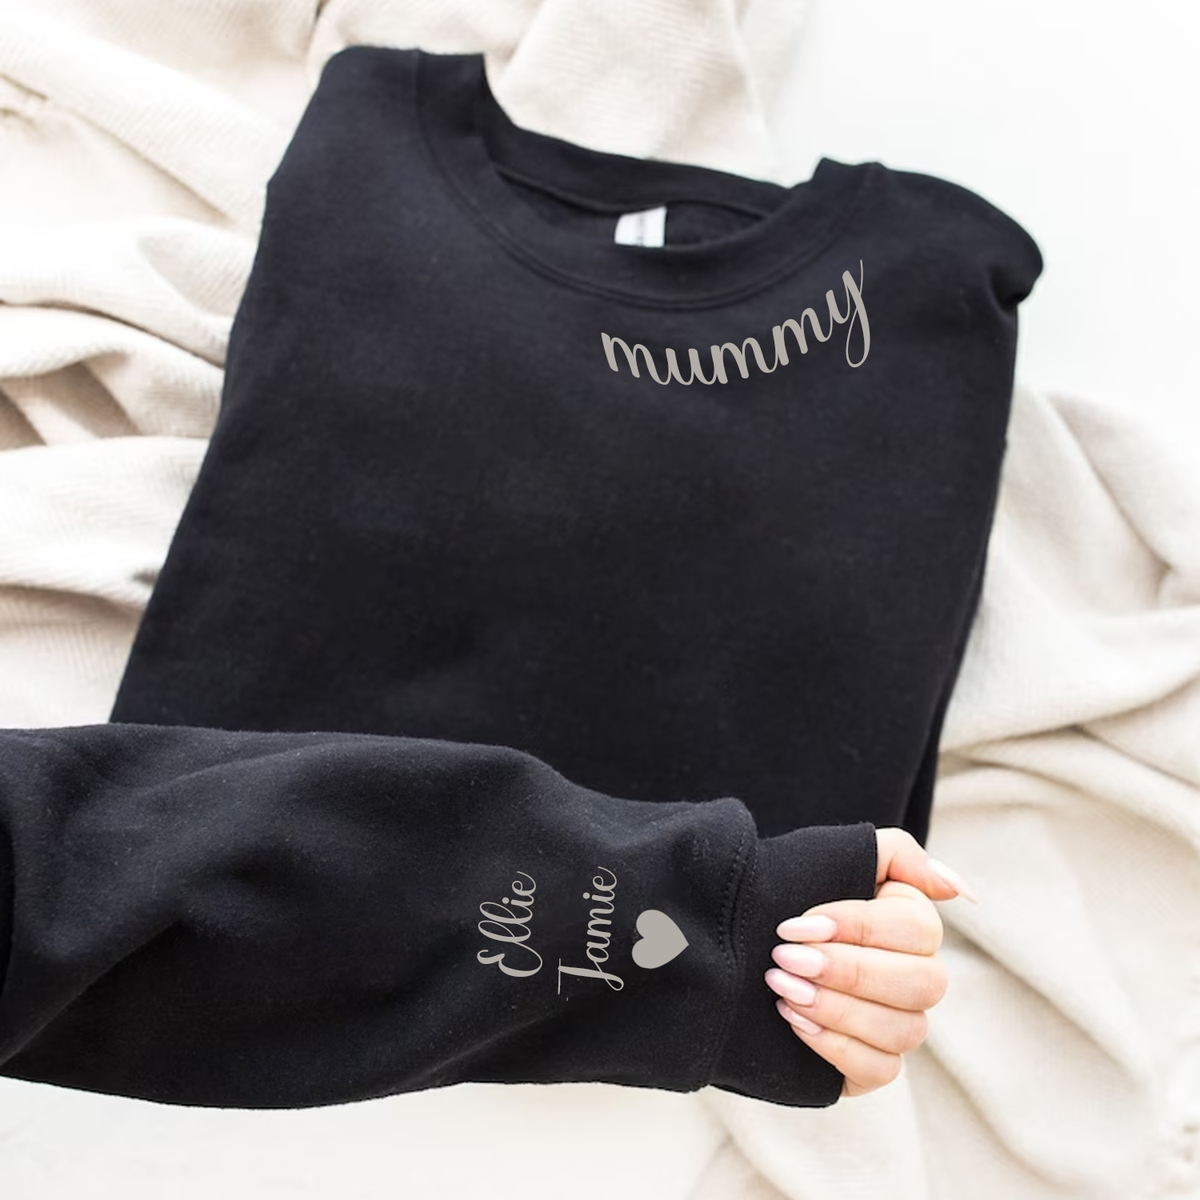 Personalised Mummy Neck Sweatshirt - childrens name(s) on sleeve - more colours available